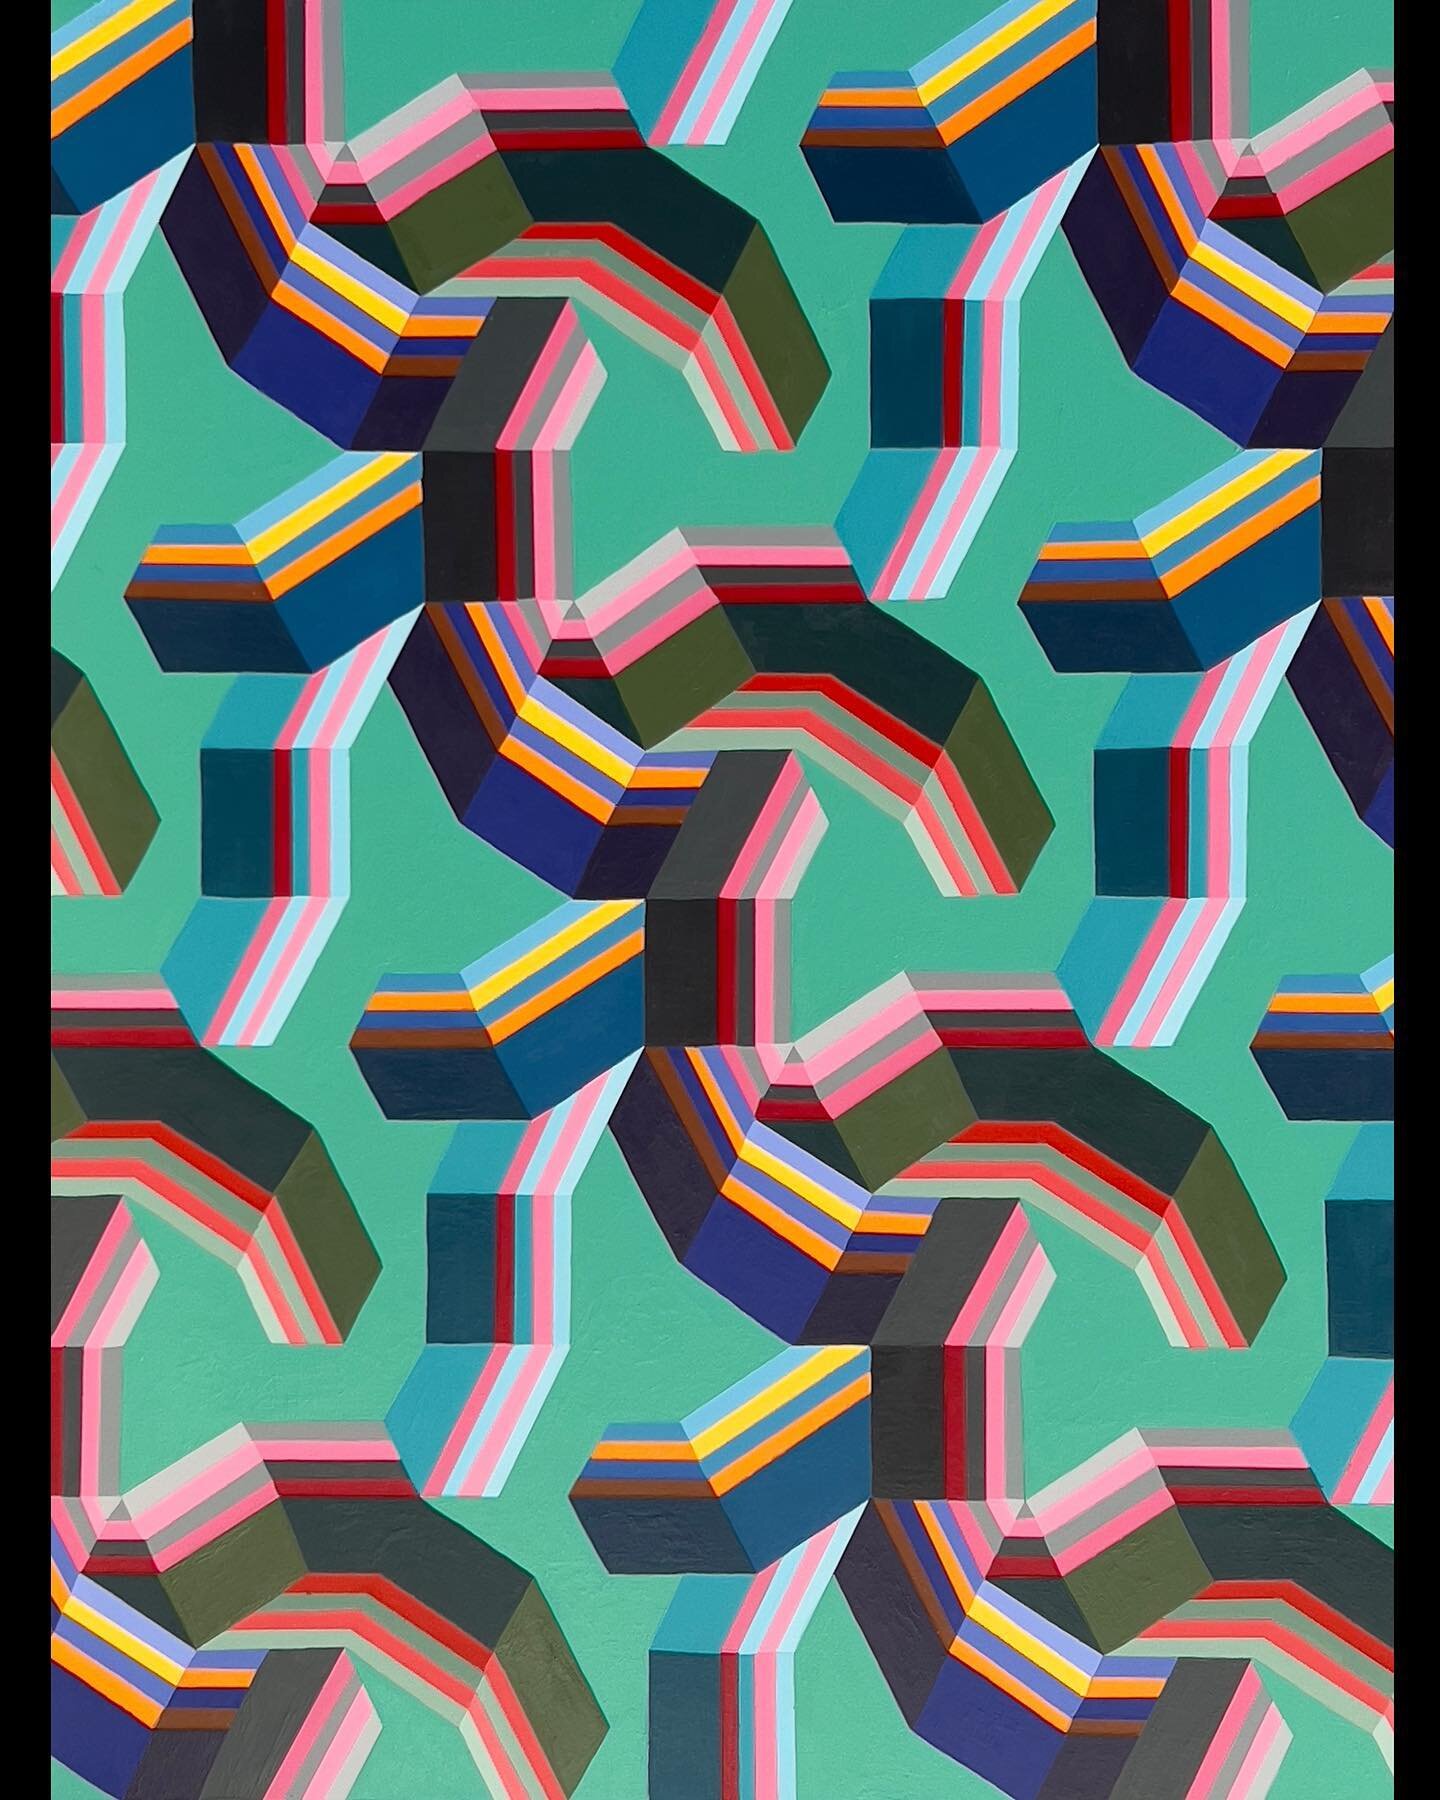 Finished this piece up this weekend!
Played around with an isometric grid to develop the pattern design (swipe over), and went a bit crazy with the color scheme this time 🙂
18&rdquo; x 24&rdquo; Acrylic on Board

#art #artwork #painting #acrylicpain